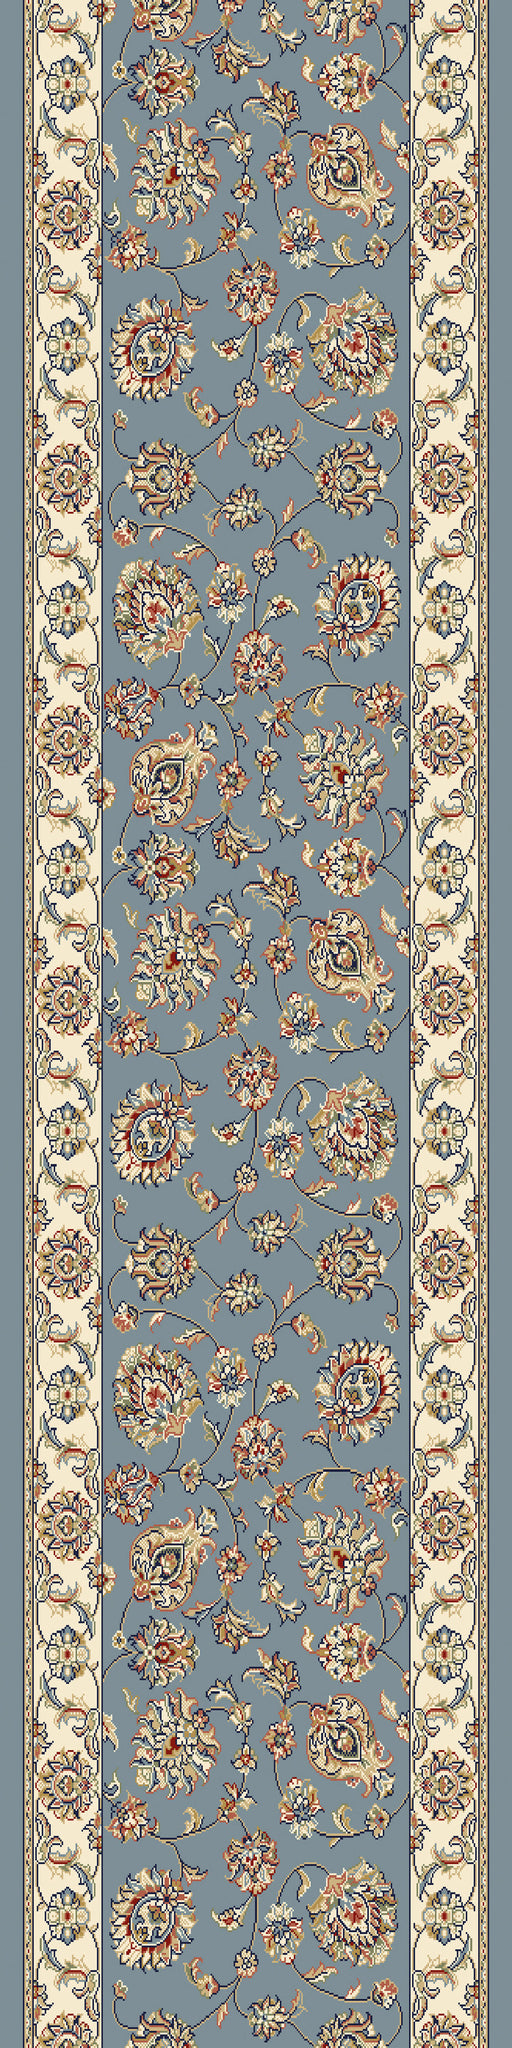 Dynamic Rugs Ancient Garden 57365 Light Blue/Ivory